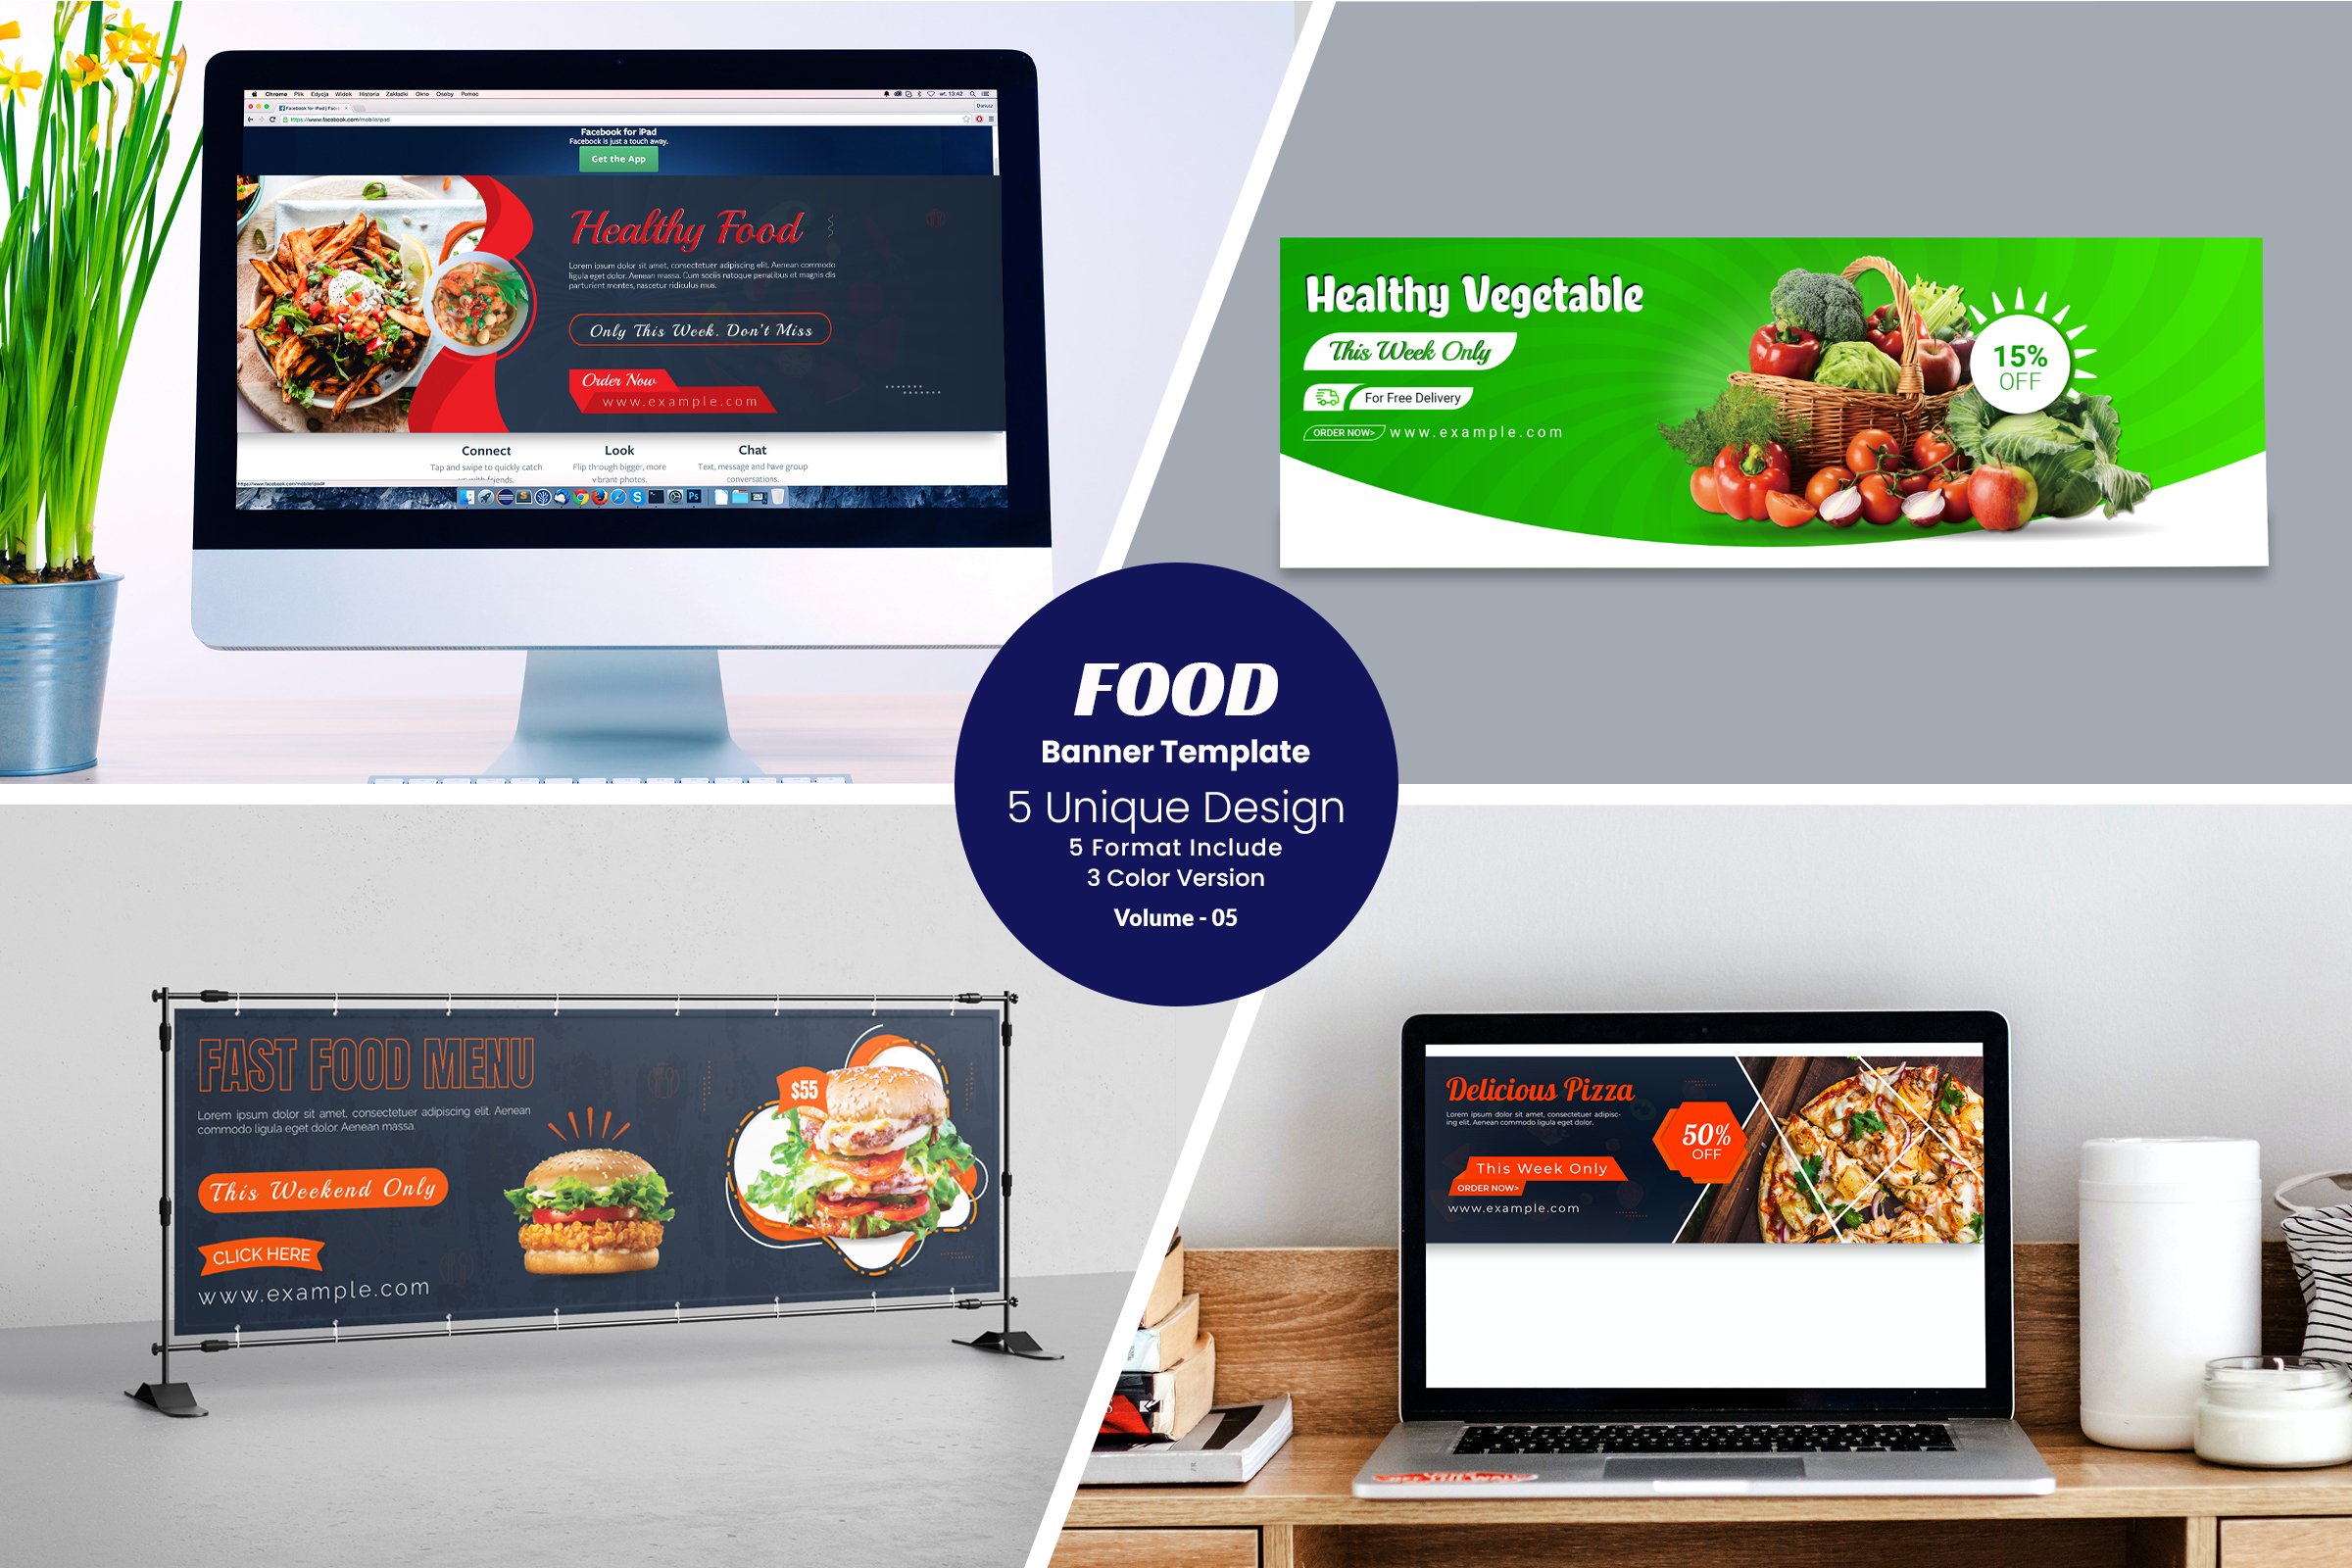 Food Sliders & Feature Templates cover image.